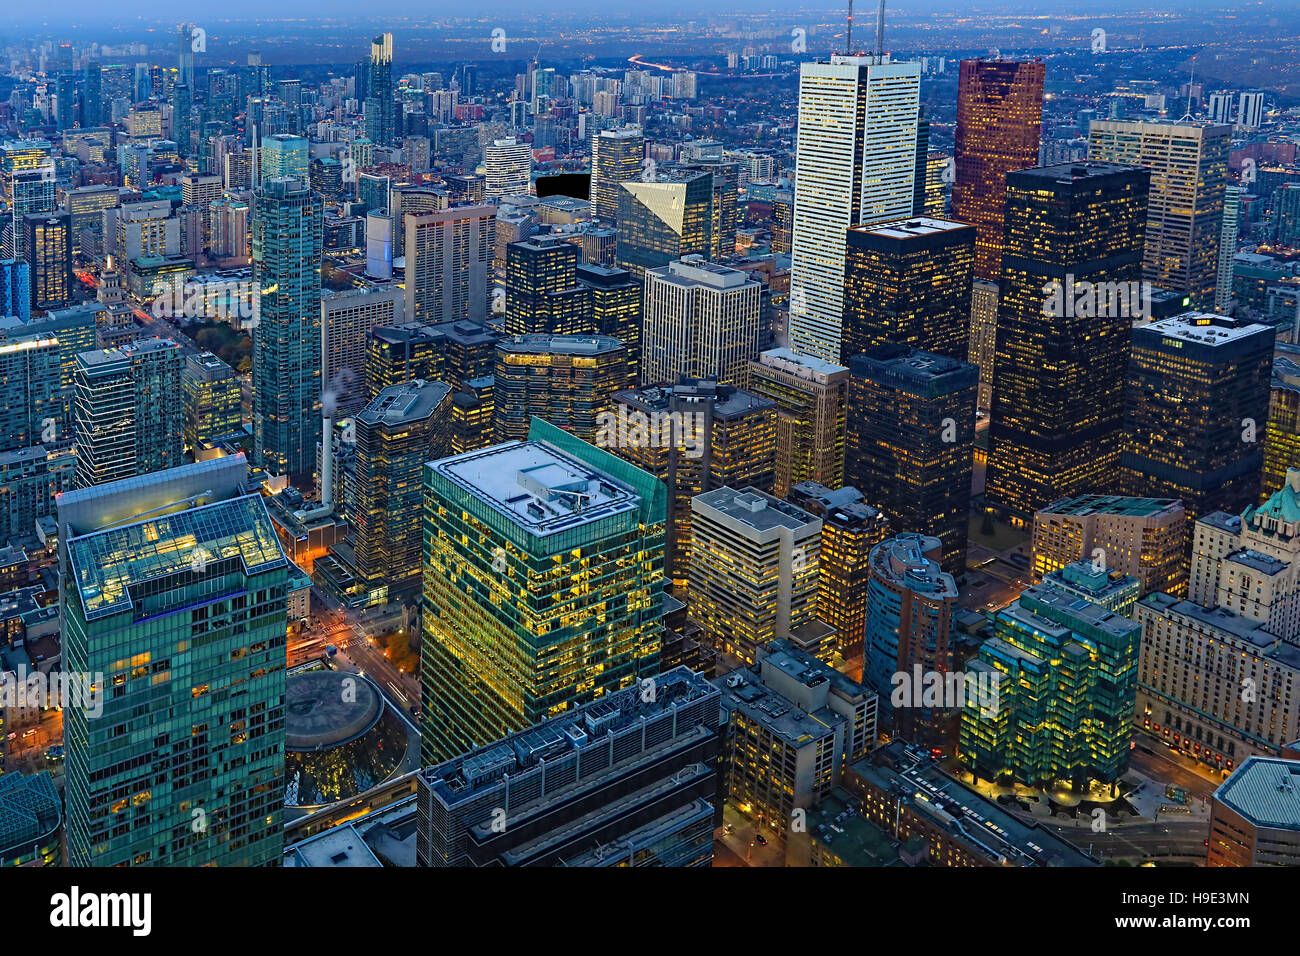 An Aerial of Toronto city center after dark Stock Photo